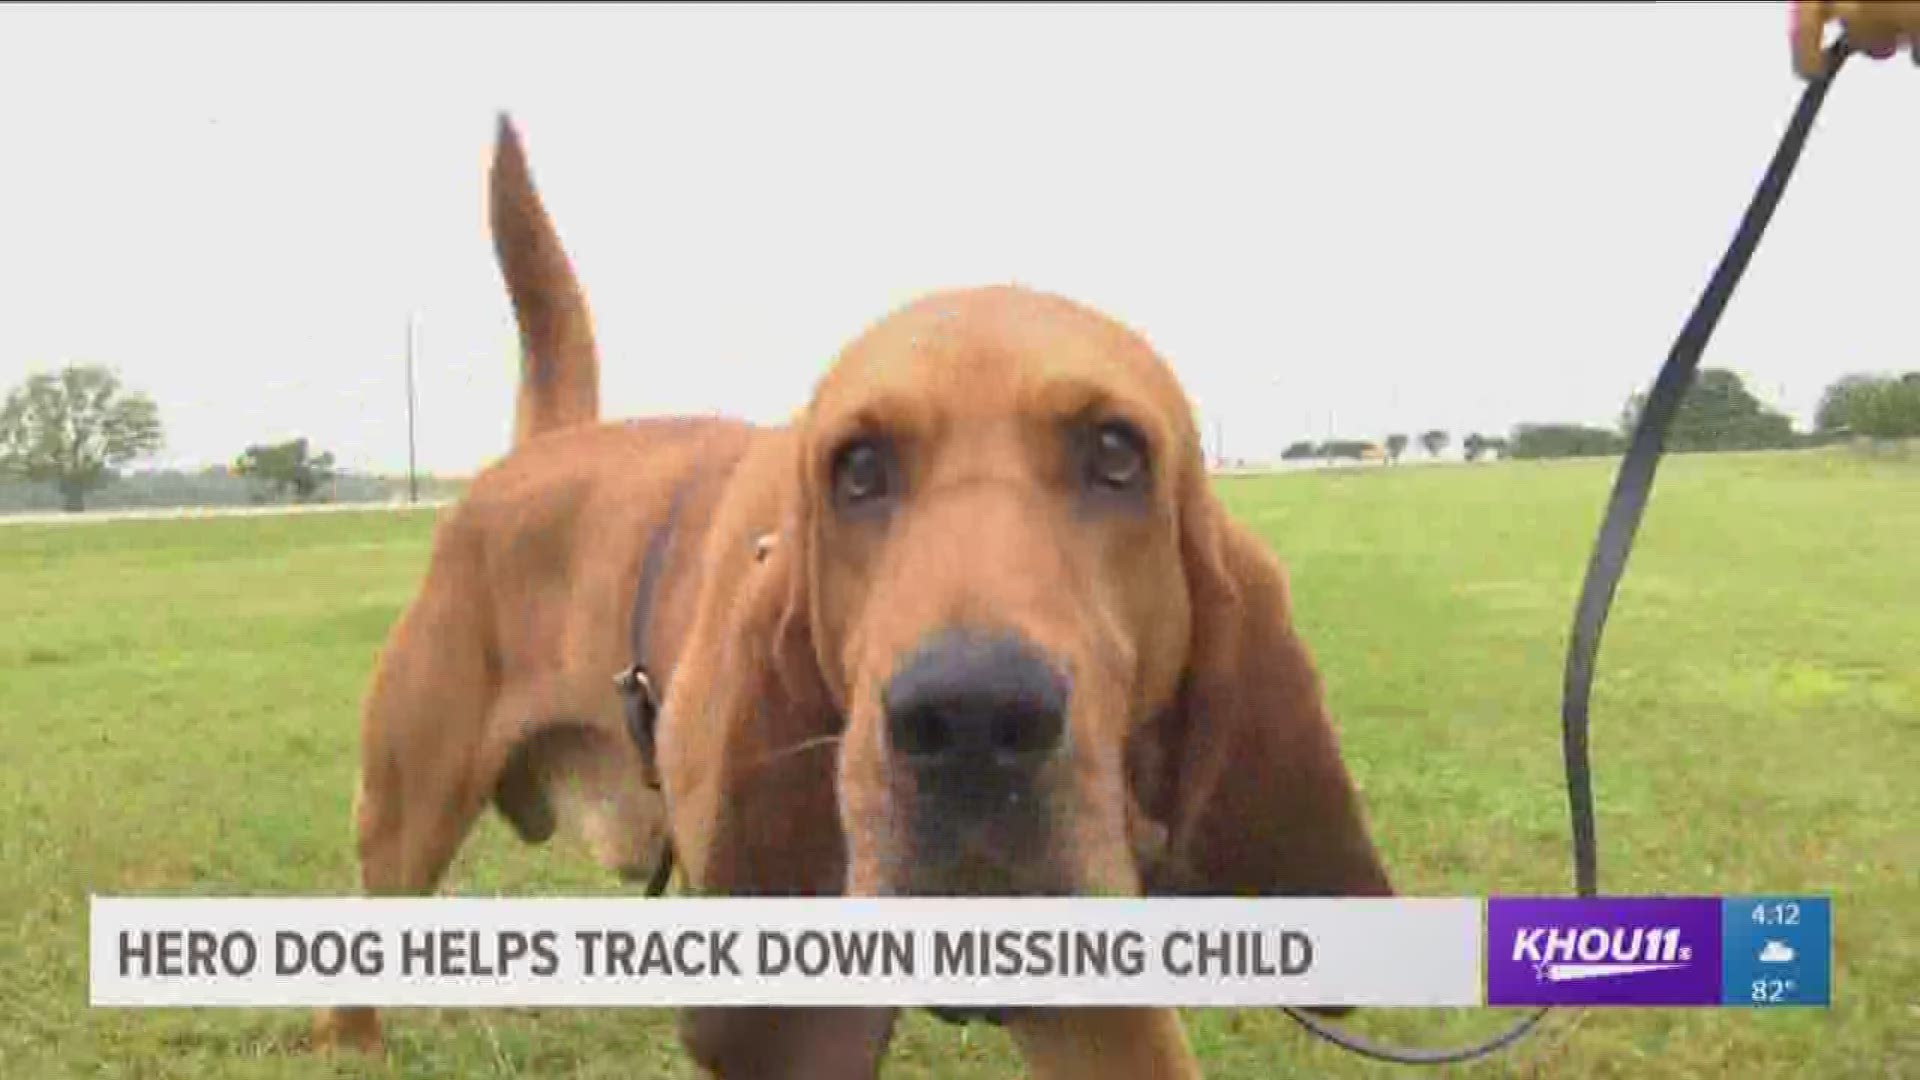 Ringo, a K9 in Grimes County, helped find a missing girl this week, and it's not the first time he's helped save a life.